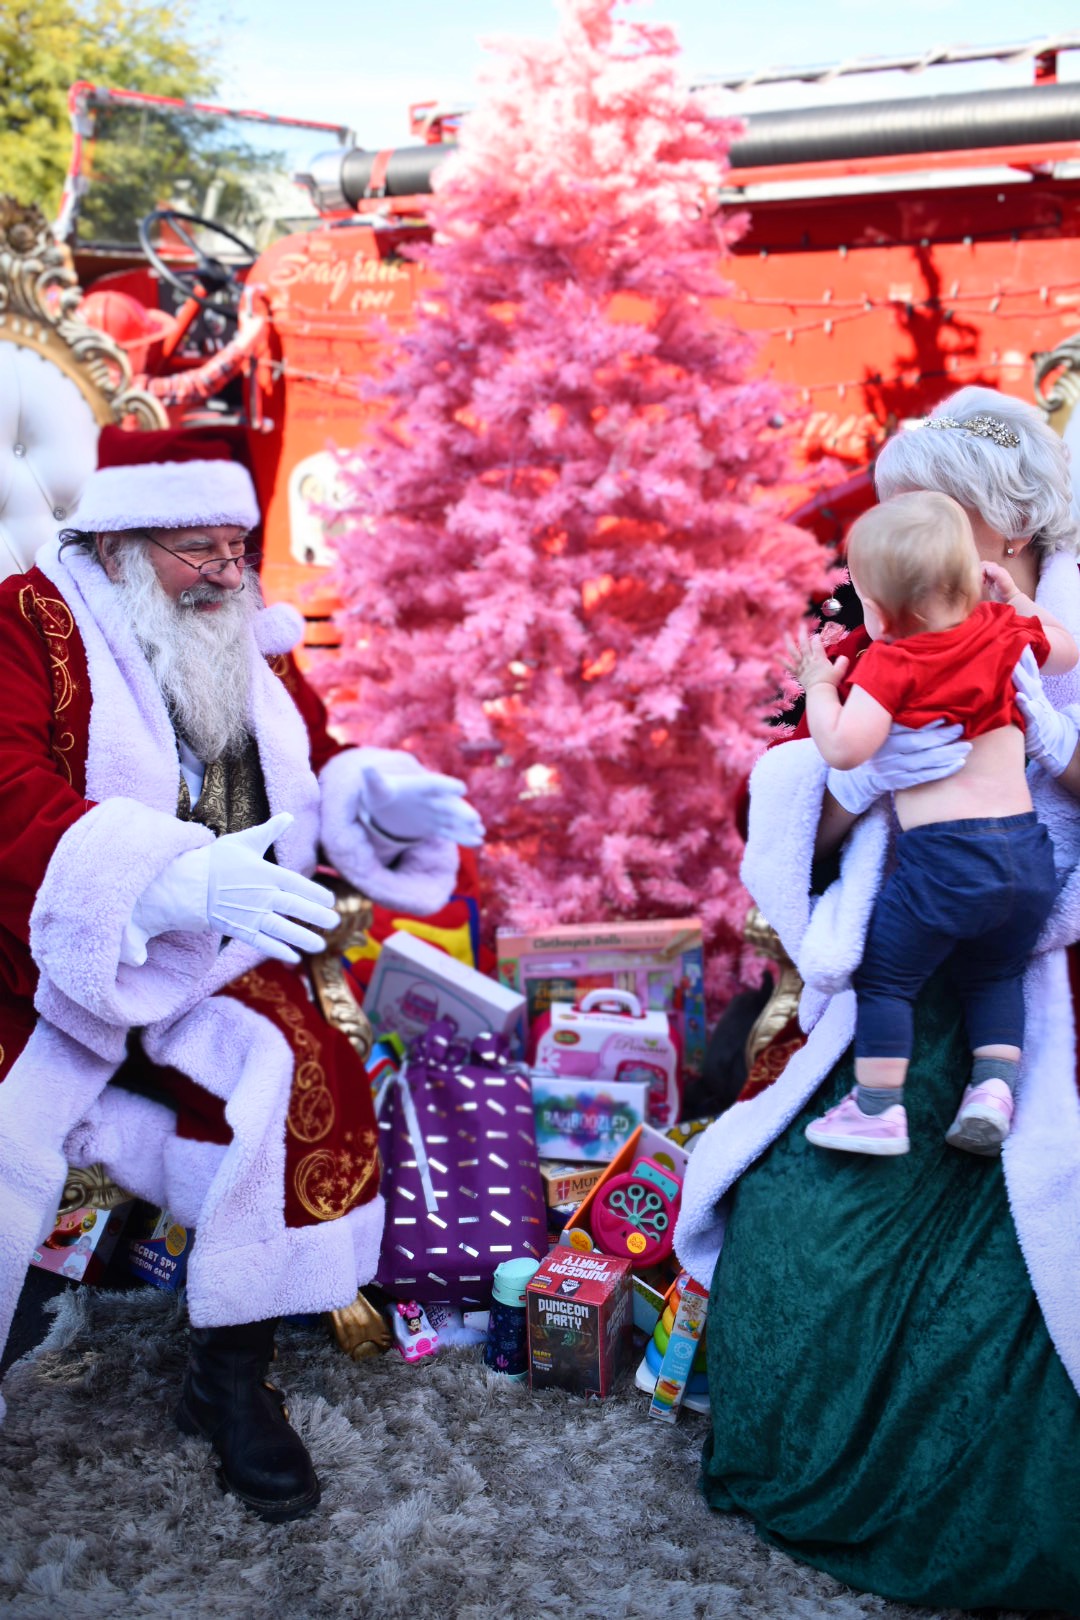 Santa and Mrs. Claus holding a child